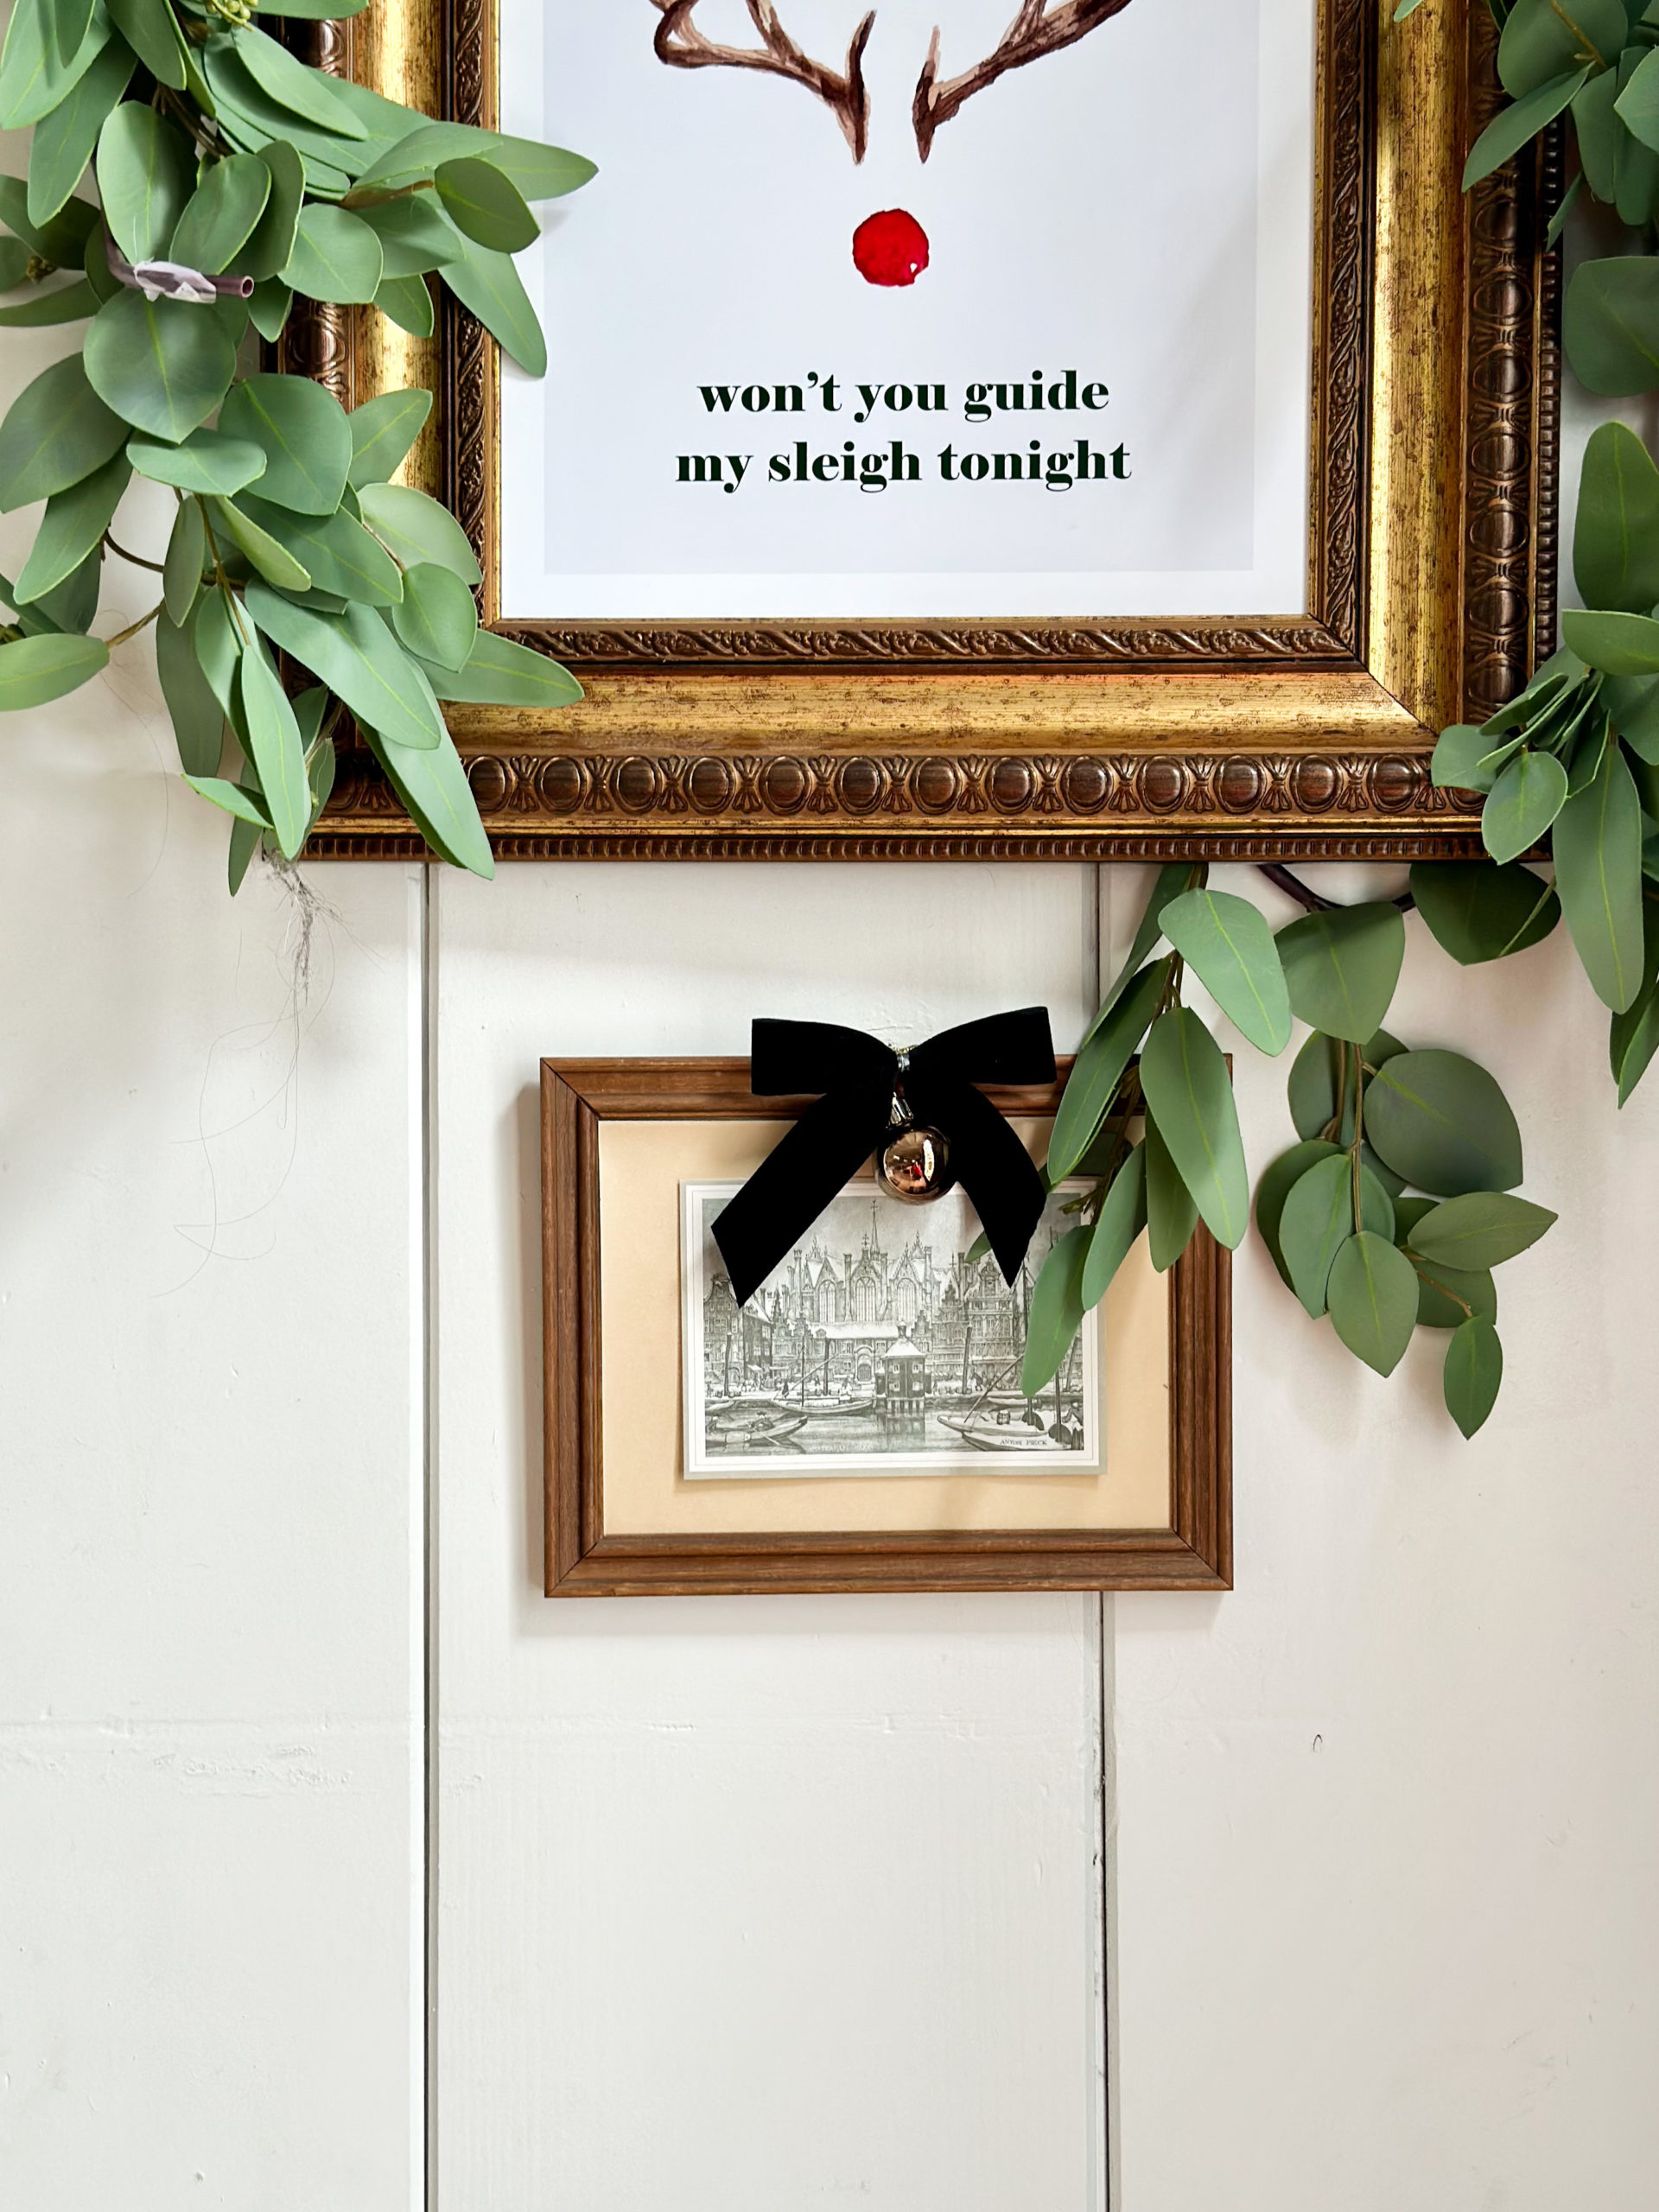 easy and budget friendly ways to decorate for christmas, decorating with bows, decorating art for christmas, christmas decor ideas, bows on art, christmas art, decorating art for christmas, mopboard black benjamin moore, swiss coffee paint color, white paint color, bow in window, shiplap walls, thrifted christmas, bells on door, laminate floors